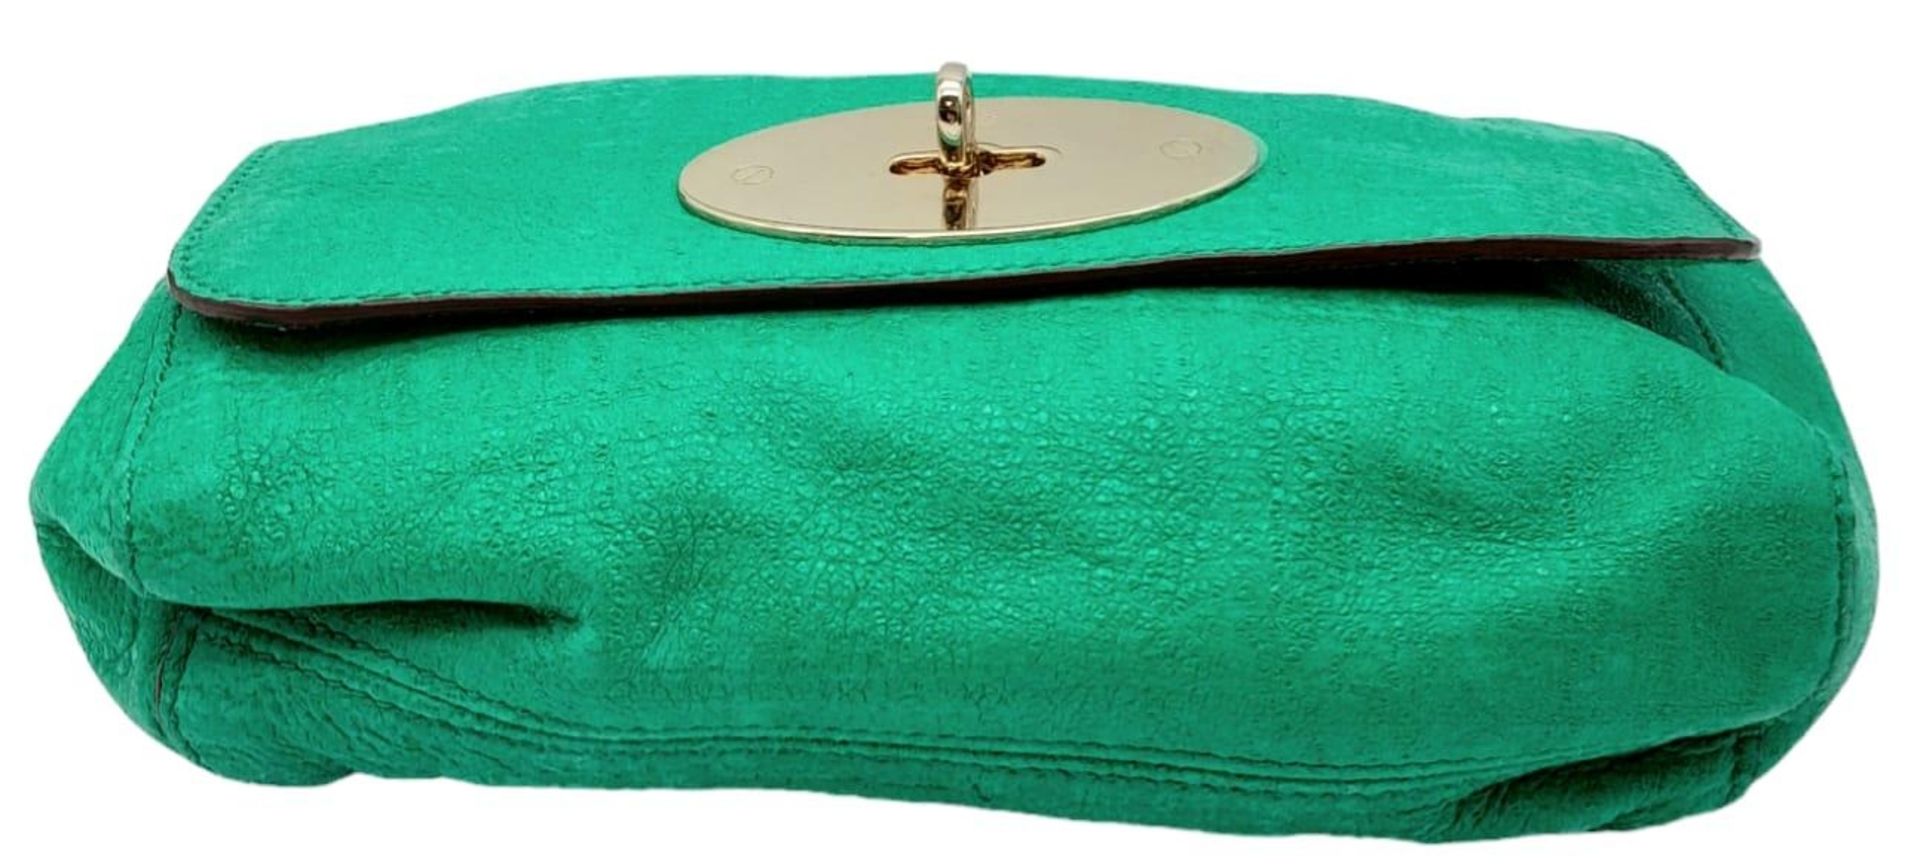 A green Mulberry Lily mini bag with gold tone hardware and matching strap. Size approx. 20x18x8cm. - Image 6 of 9